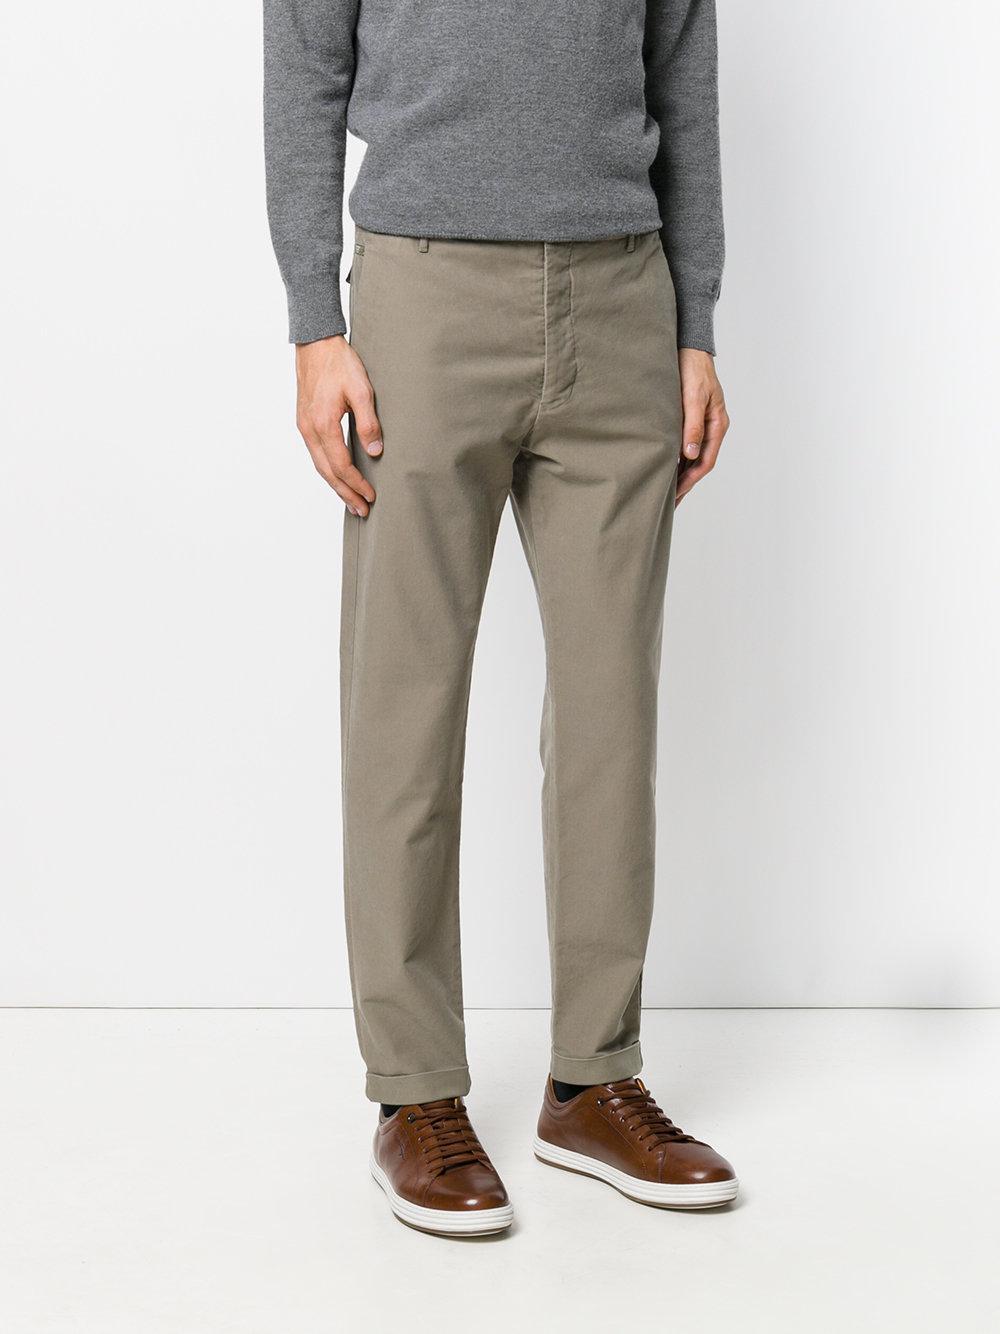 Lyst - Closed Chino Trousers in Natural for Men